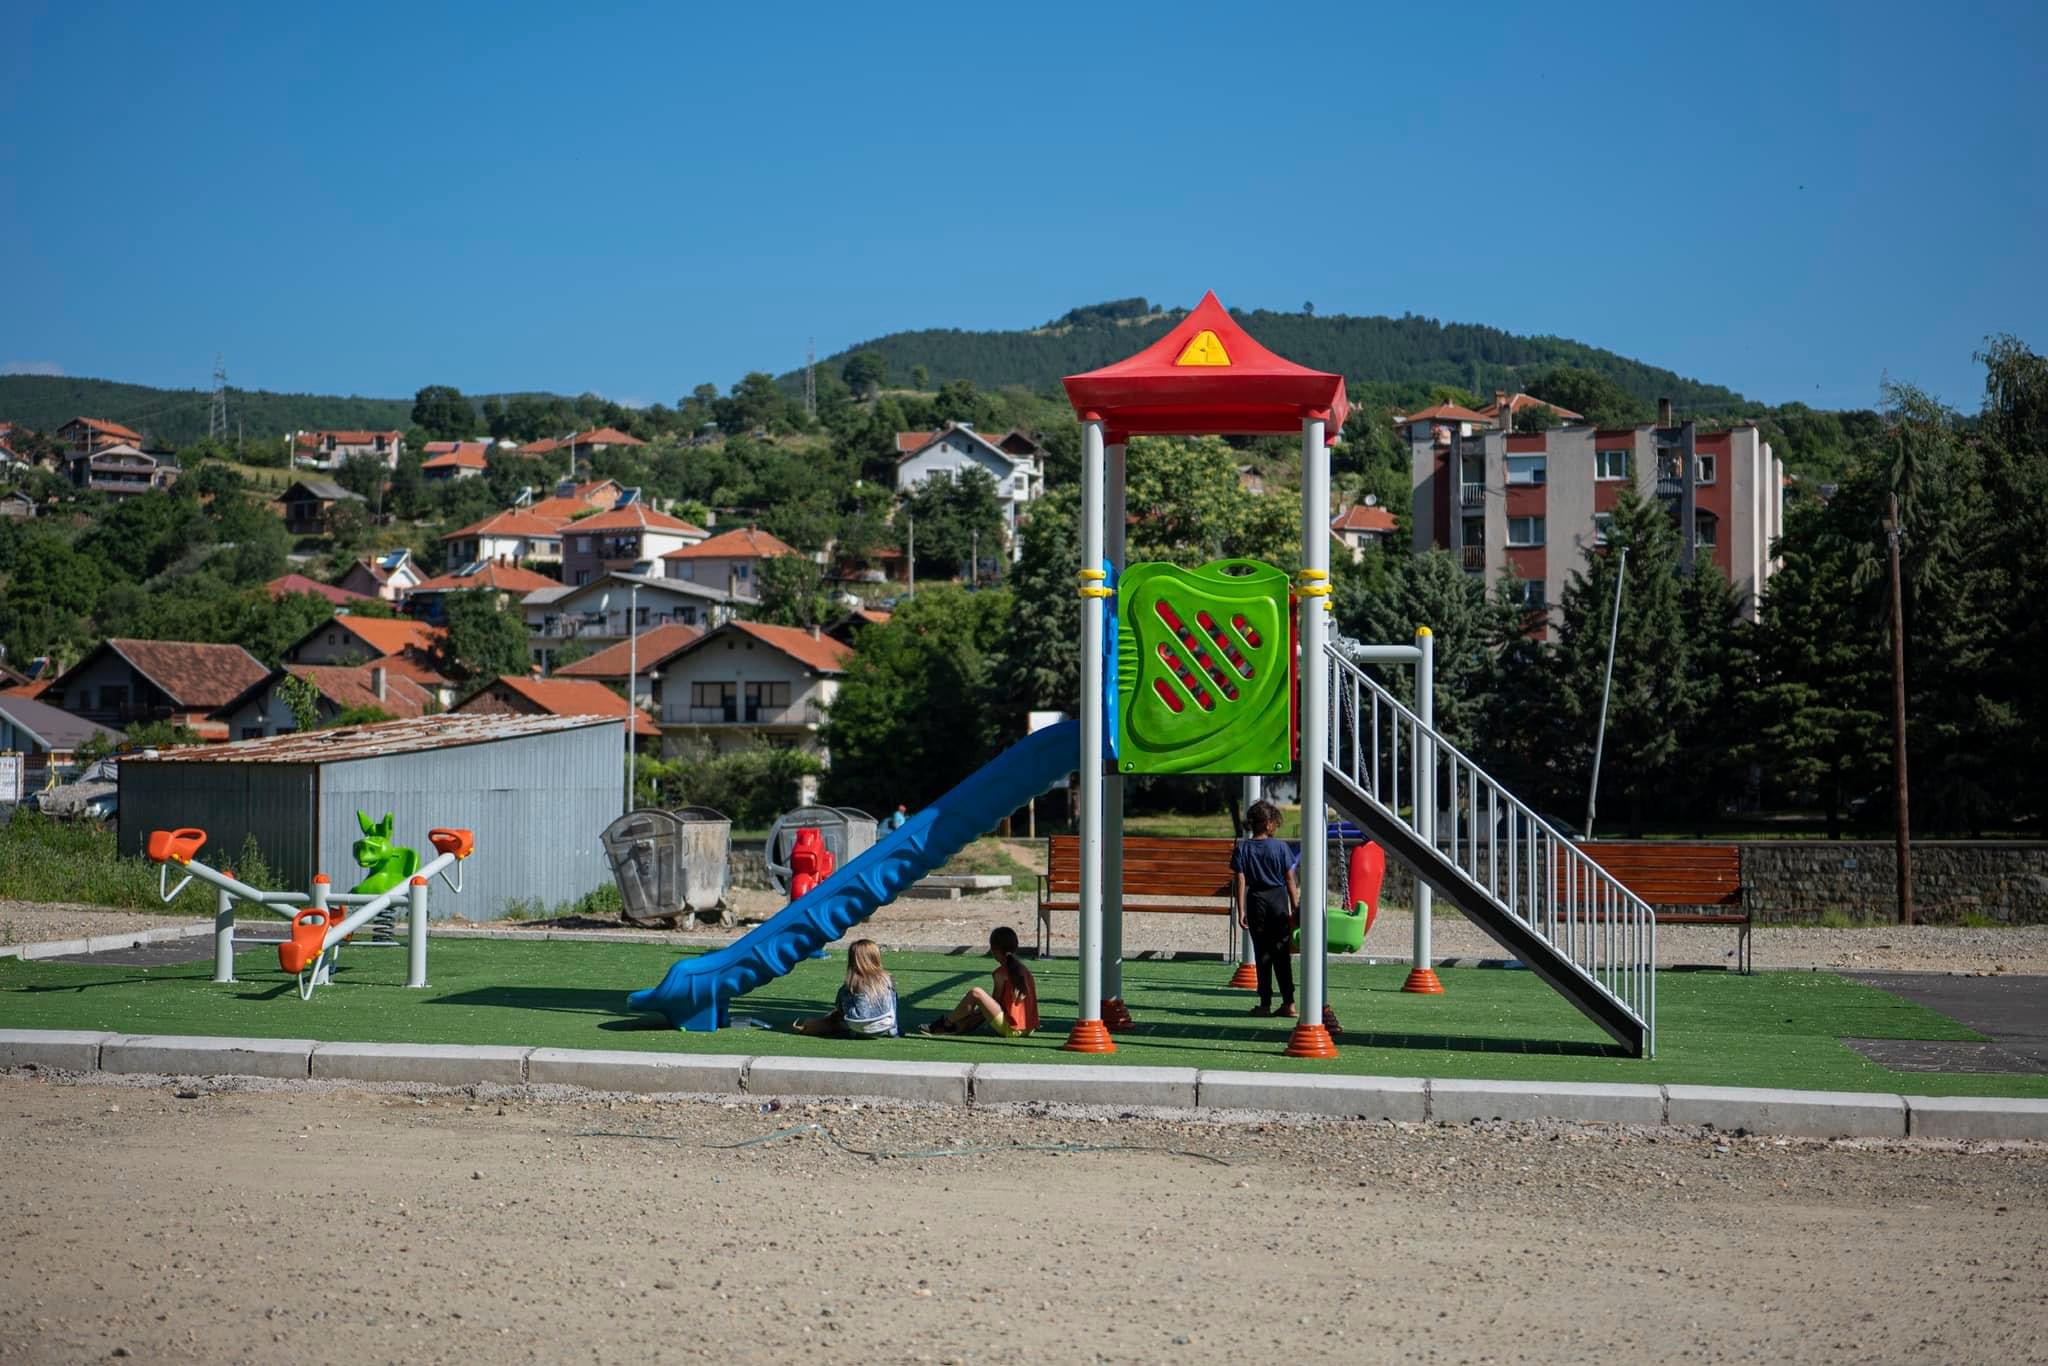 ROMACTED II small grants scheme supports the installation of a new children’s playground in Kriva Palanka